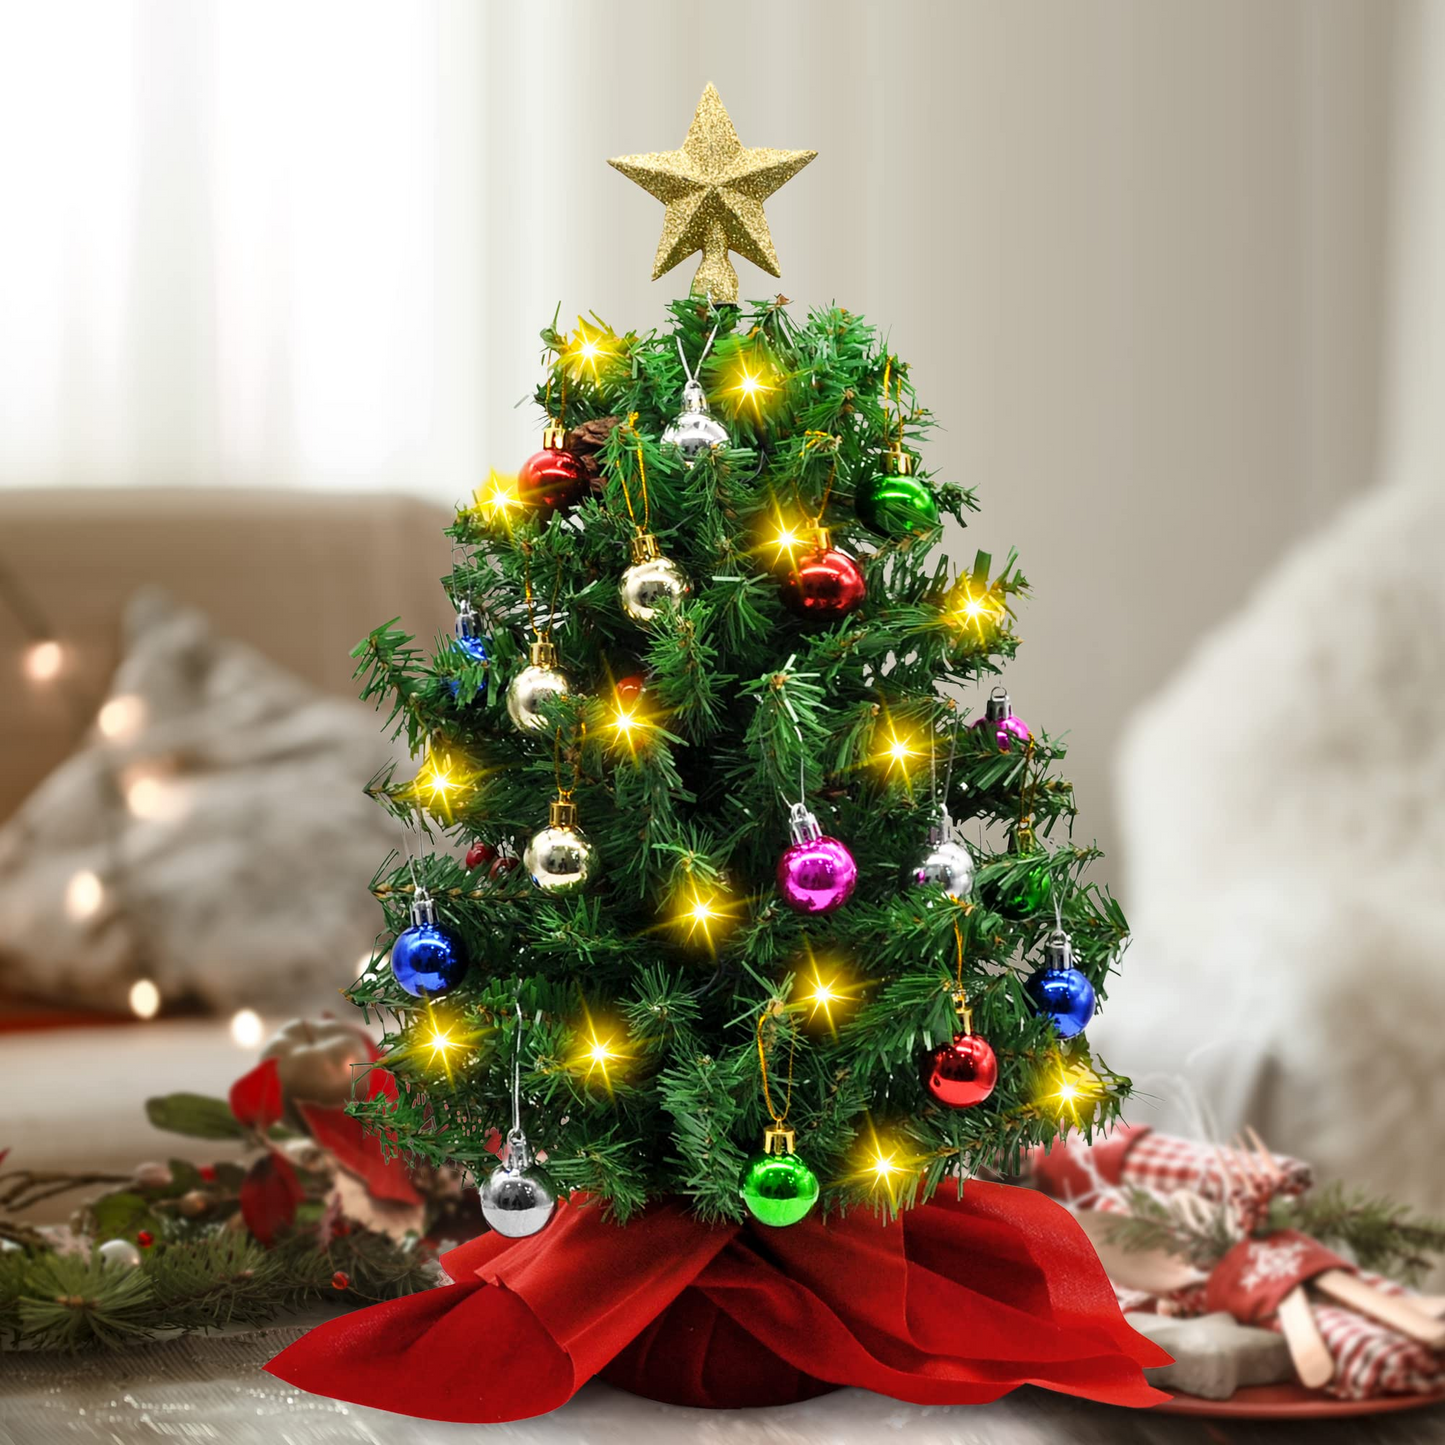 Tabletop Christmas Tree with Decoration Kit